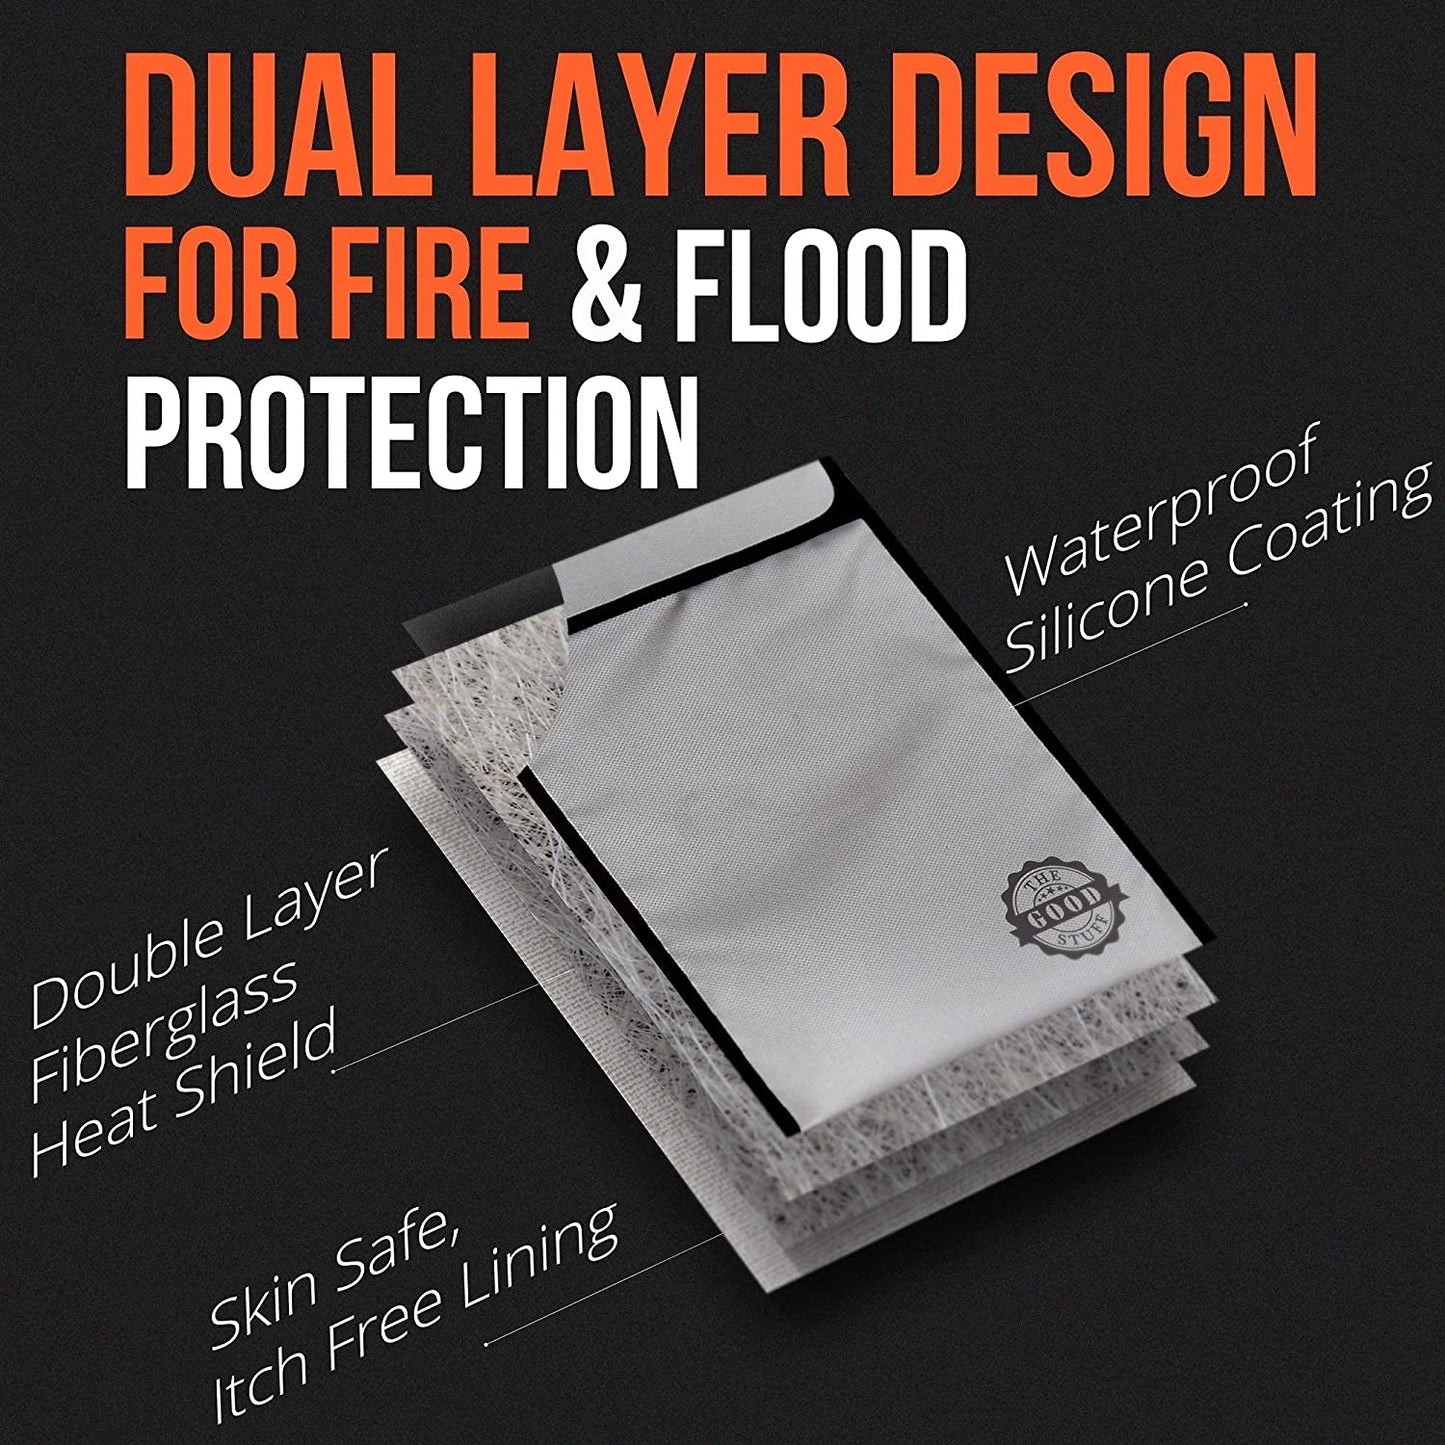 Fireproof Document Bag Legal Size: 11" x 15" Fire Proof Bag with Waterproof Coating to Protect Important Documents from Fire, Bug Out Bags